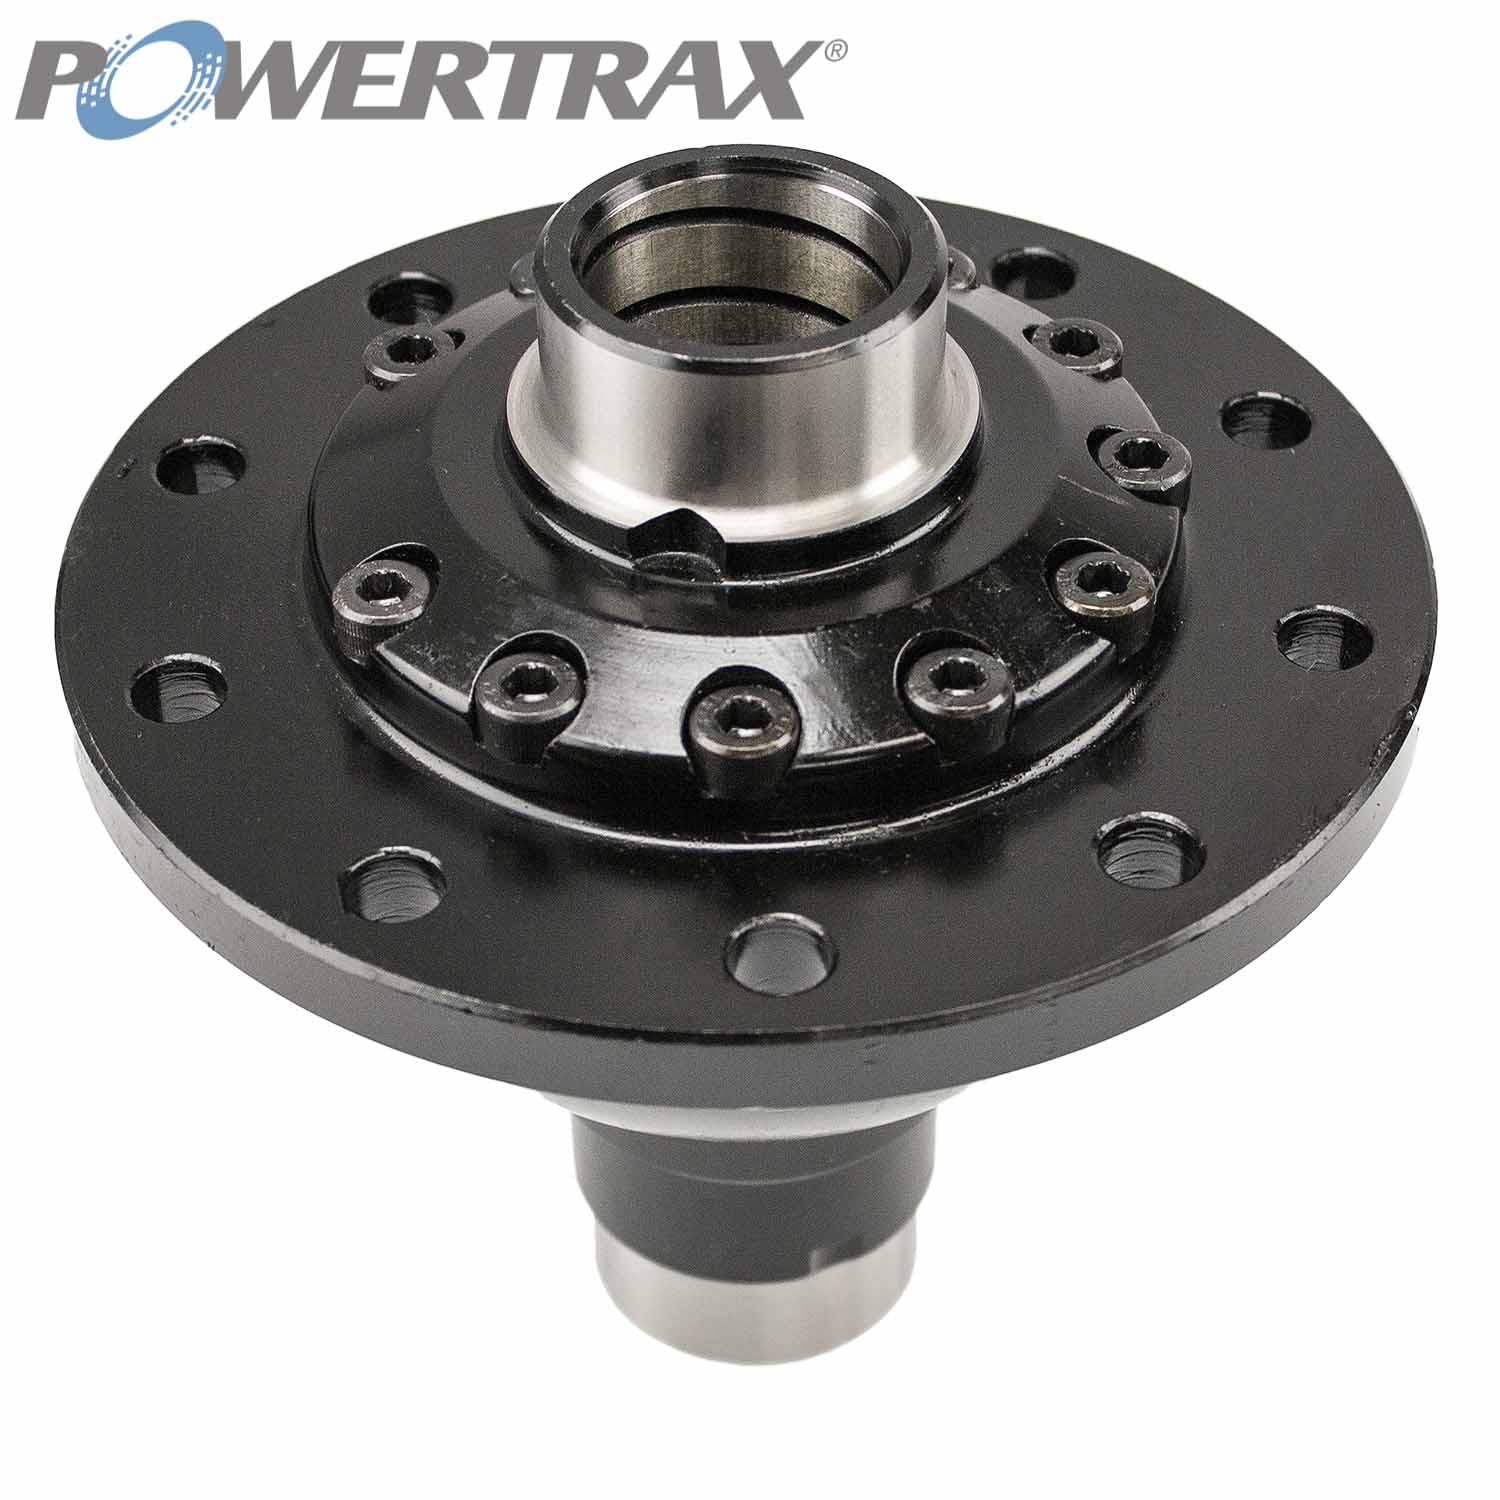 PowerTrax LK109035 Differential Lock Assembly